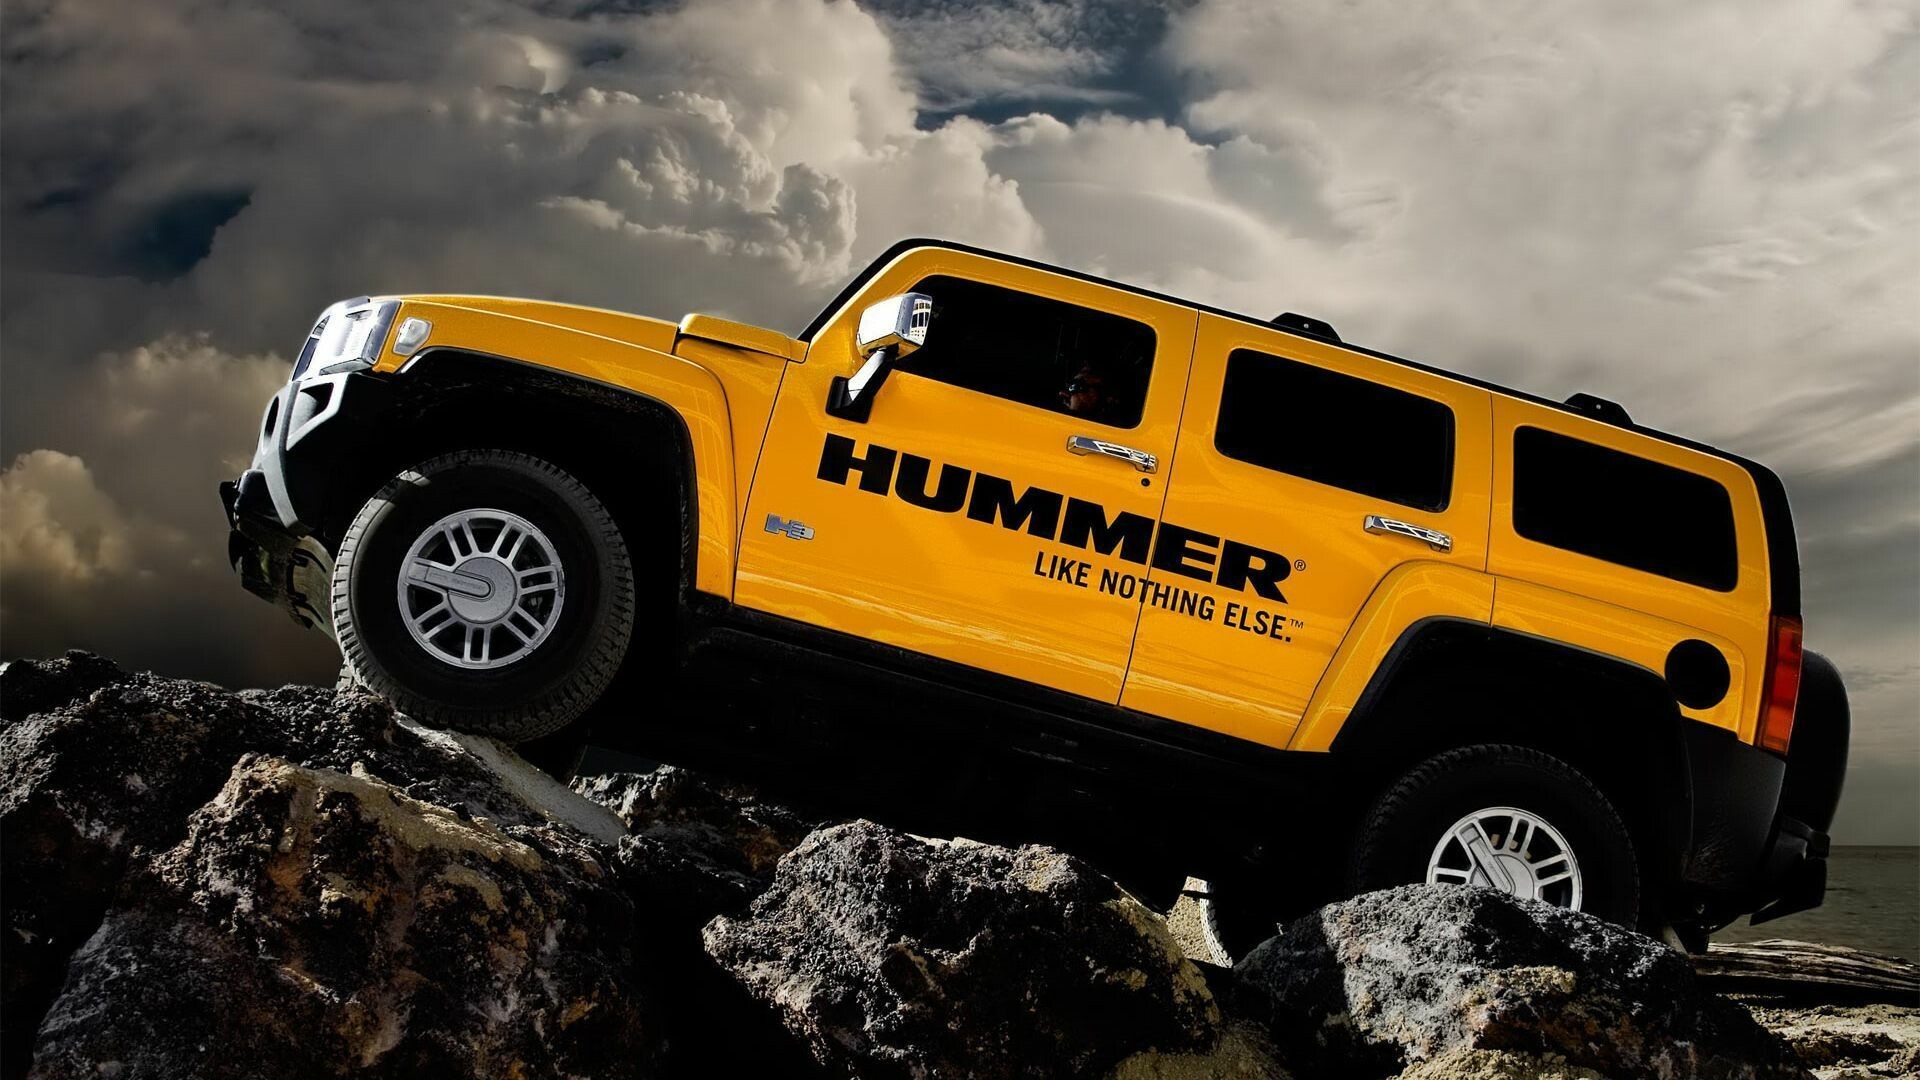 Hummer: H2 model, Was built at AM General Military Assembly Plant in Mishawaka, Indiana. 1920x1080 Full HD Wallpaper.